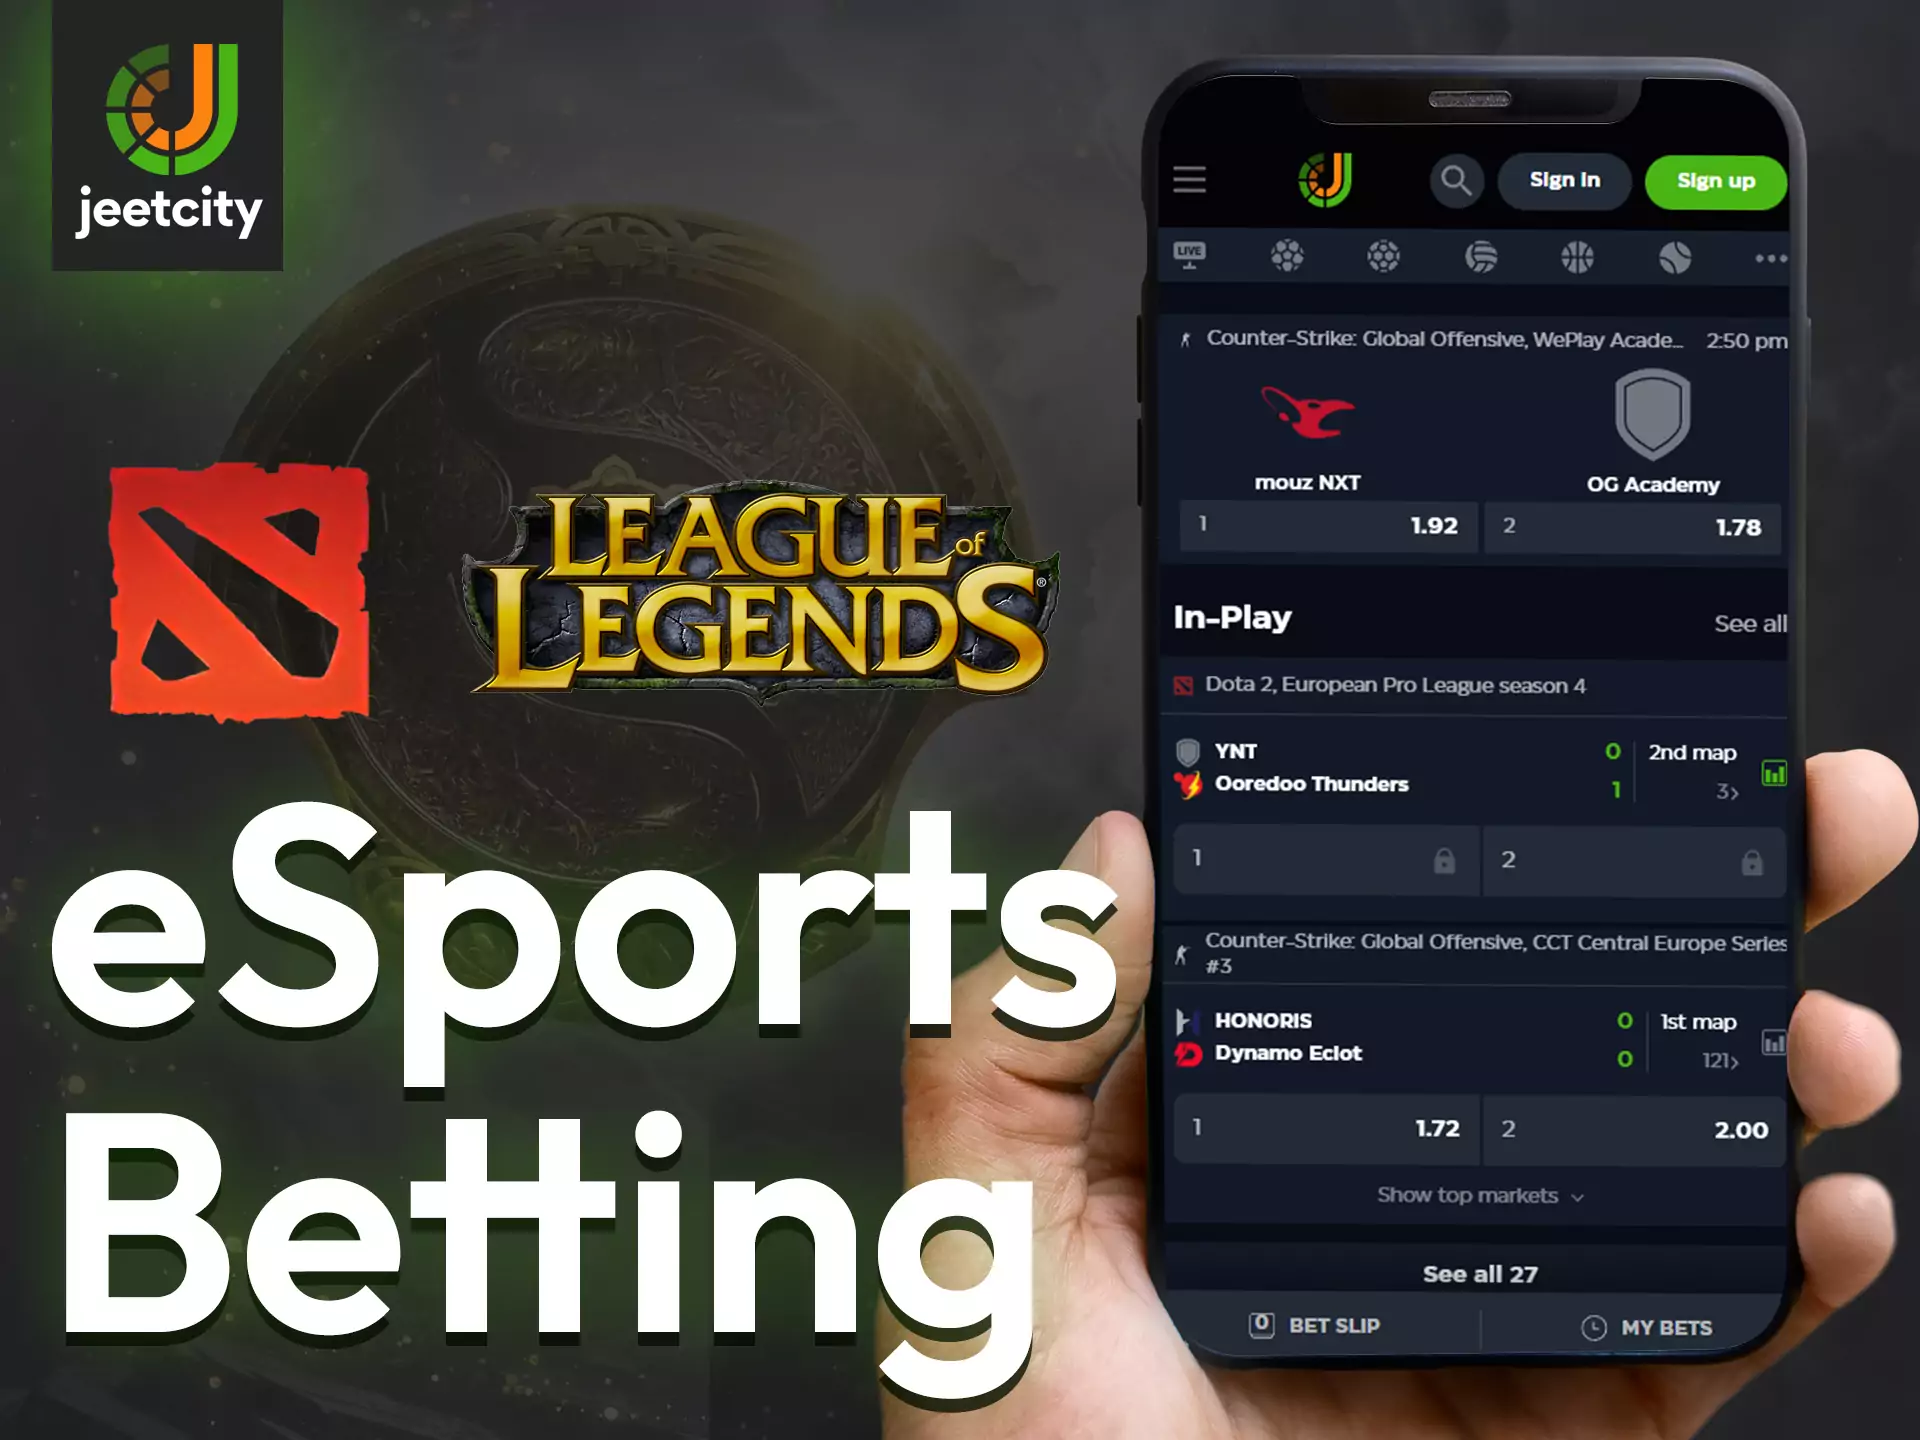 Place bets on any esport events on JeetCity.